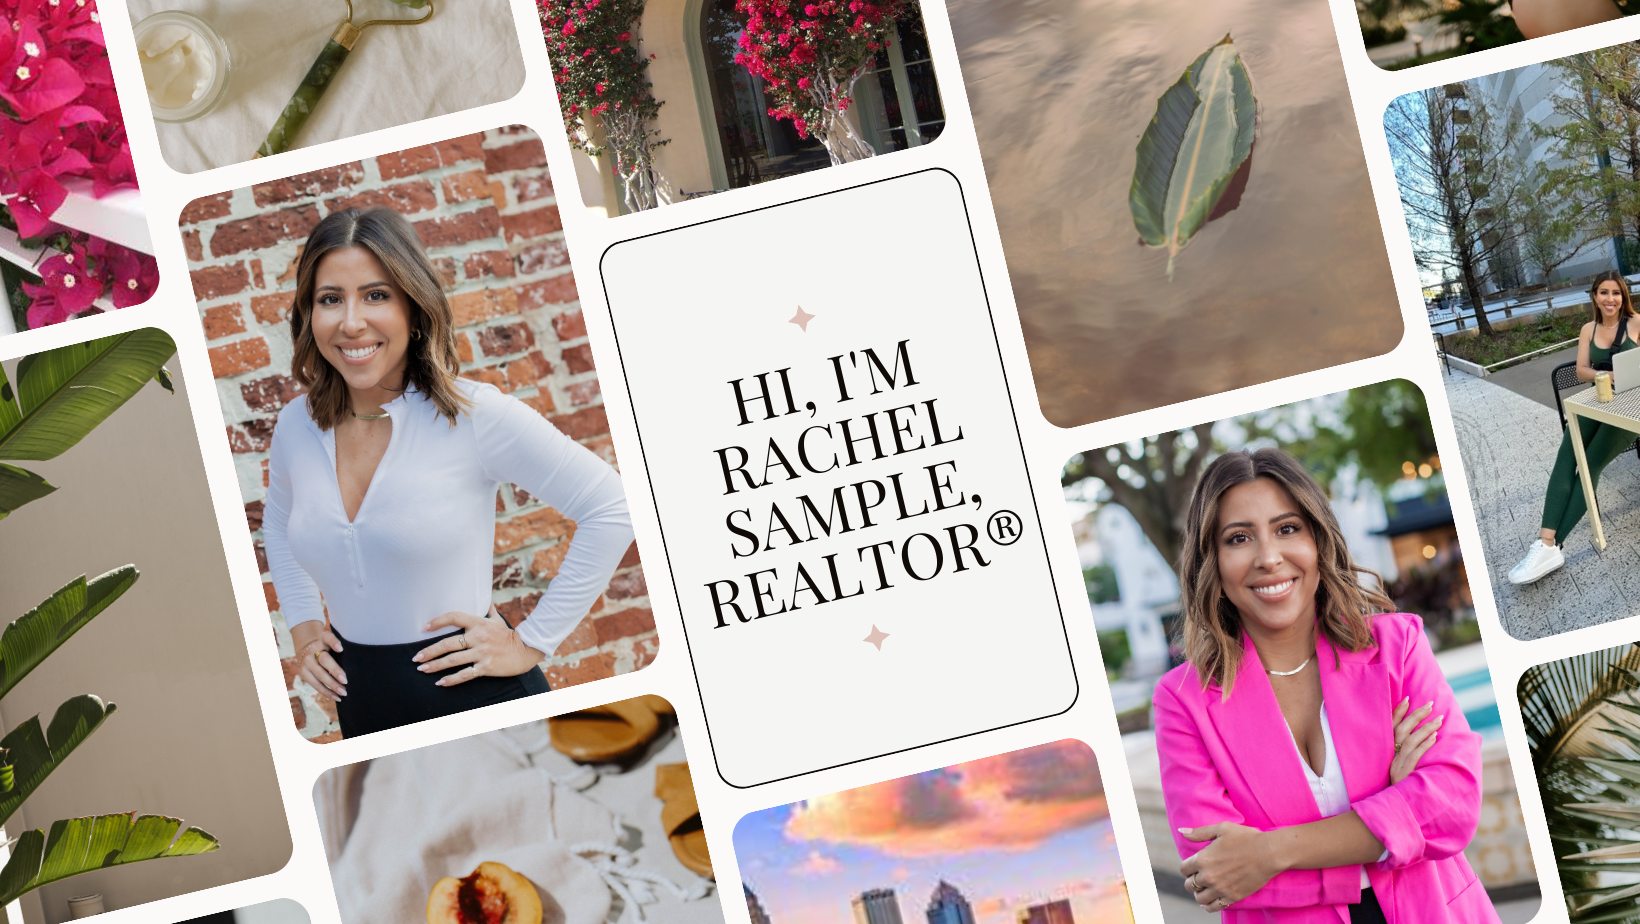 Dedicated real estate advisor, realtor in Tampa, Florida. Providing expertise and knowledge of housing market to South Tampa, Davis Islands, Hyde Park and St. Petersburg to name a few.